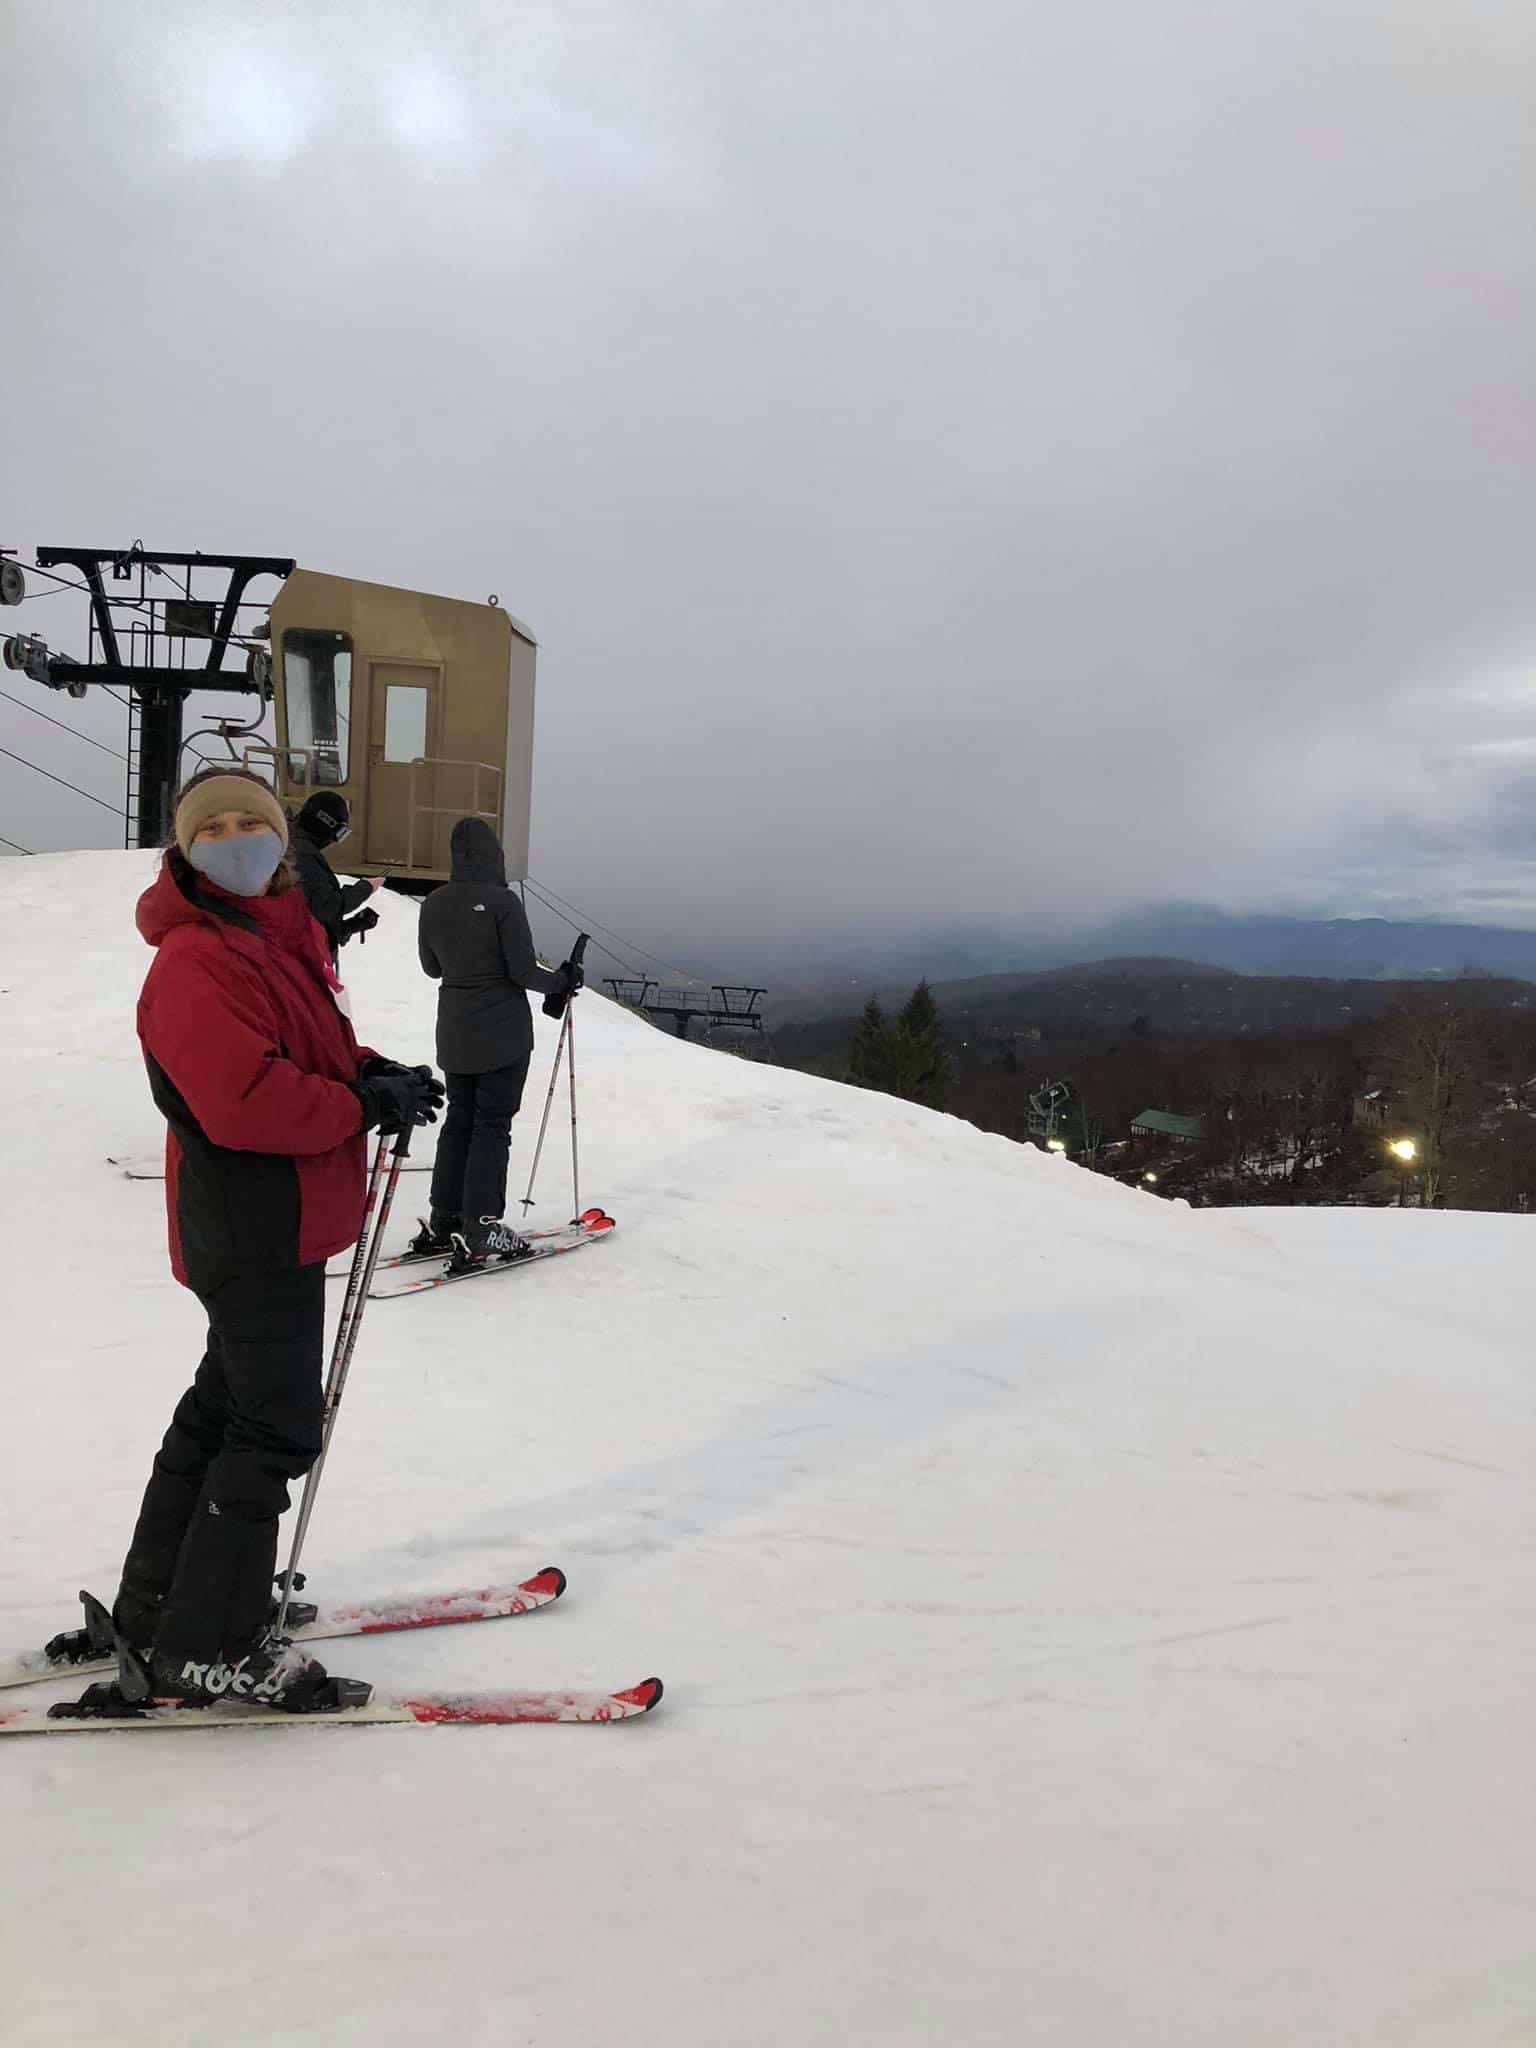 Ashley Arndt poses for a photo on skis before heading down the slope.